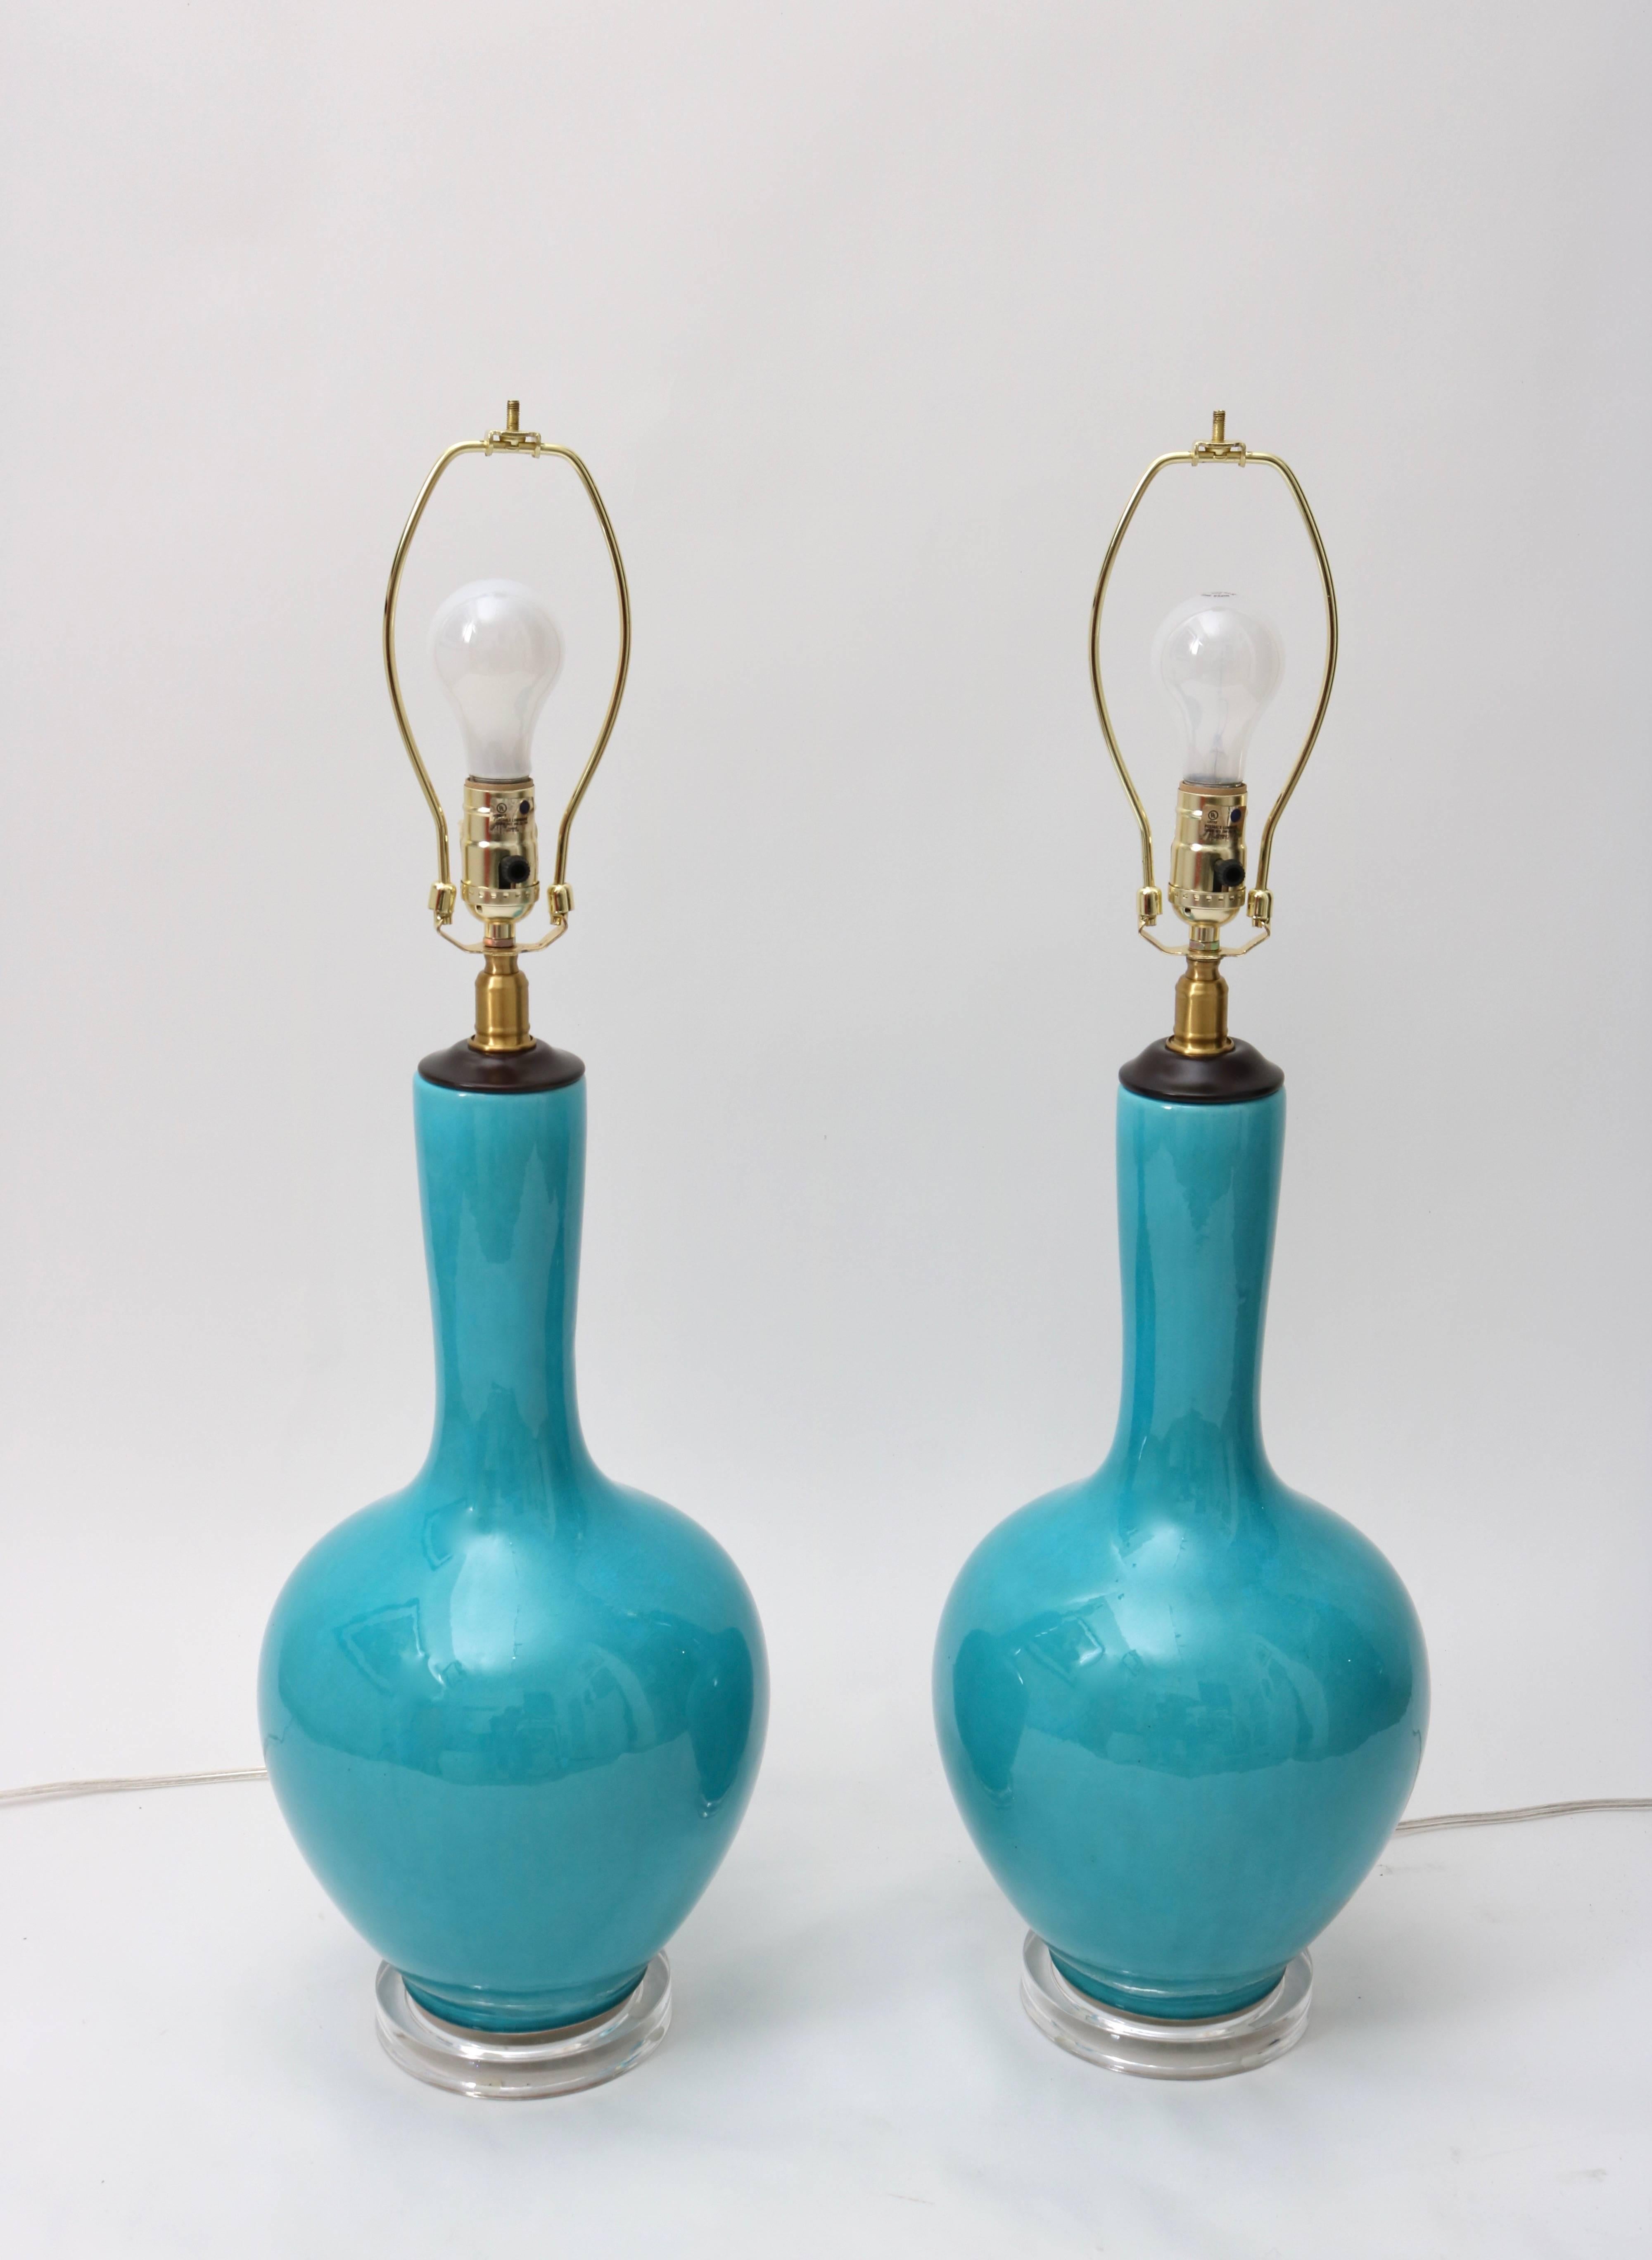 American Pair of Turquoise Colored Vase-Form Table Lamps with Lucite Bases